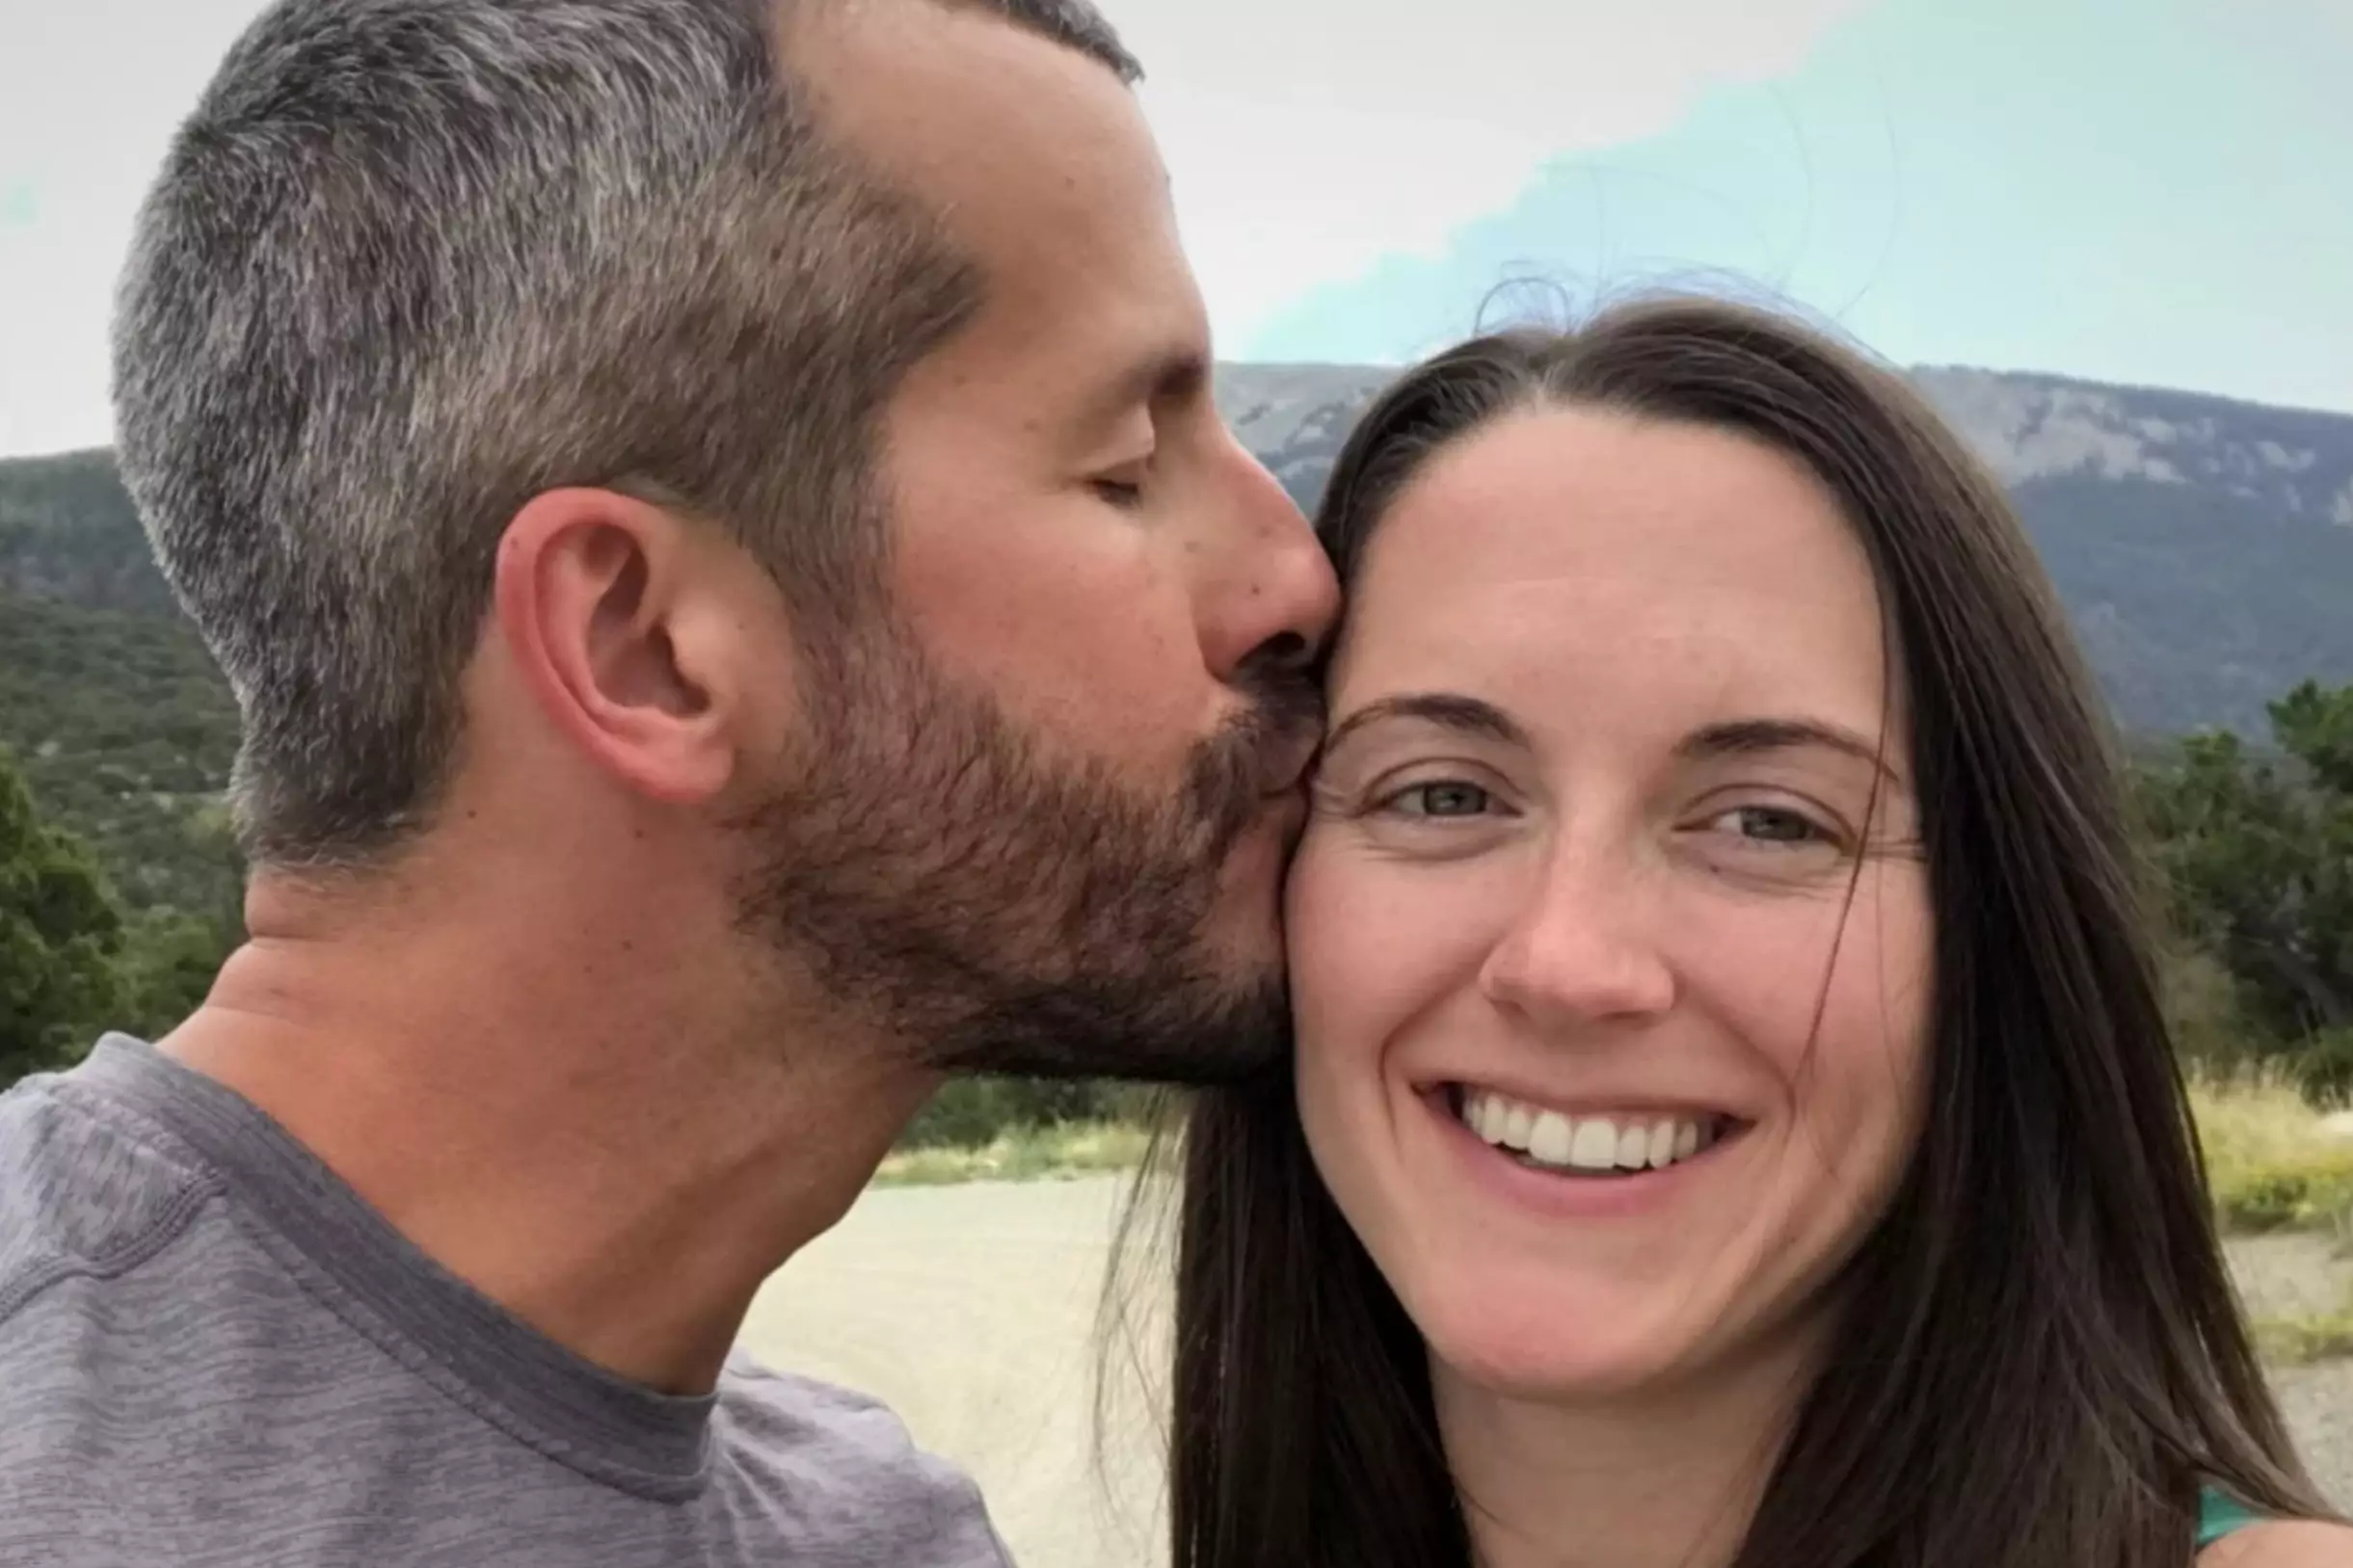 Chris Watts murdered his wife Shanann Watts and their two young daughters in 2018 (